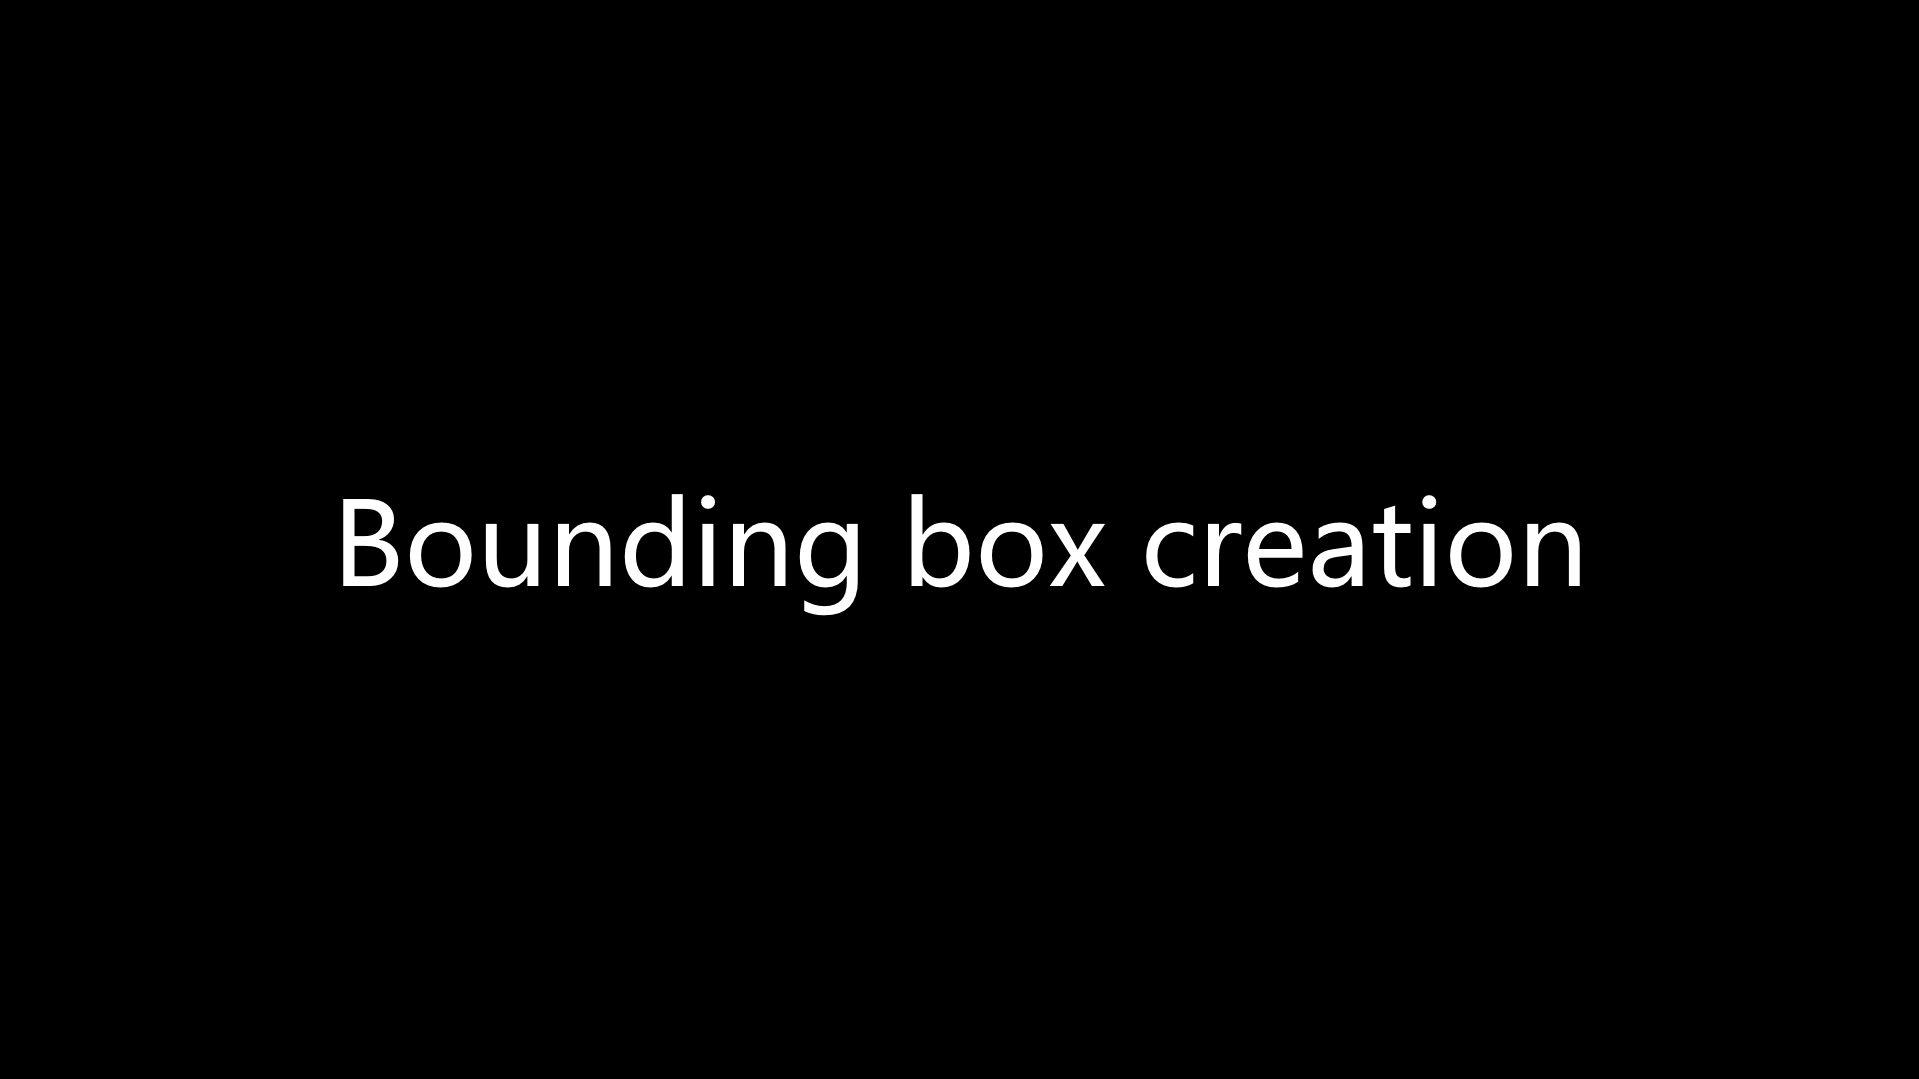 _images/box3d_creation.gif